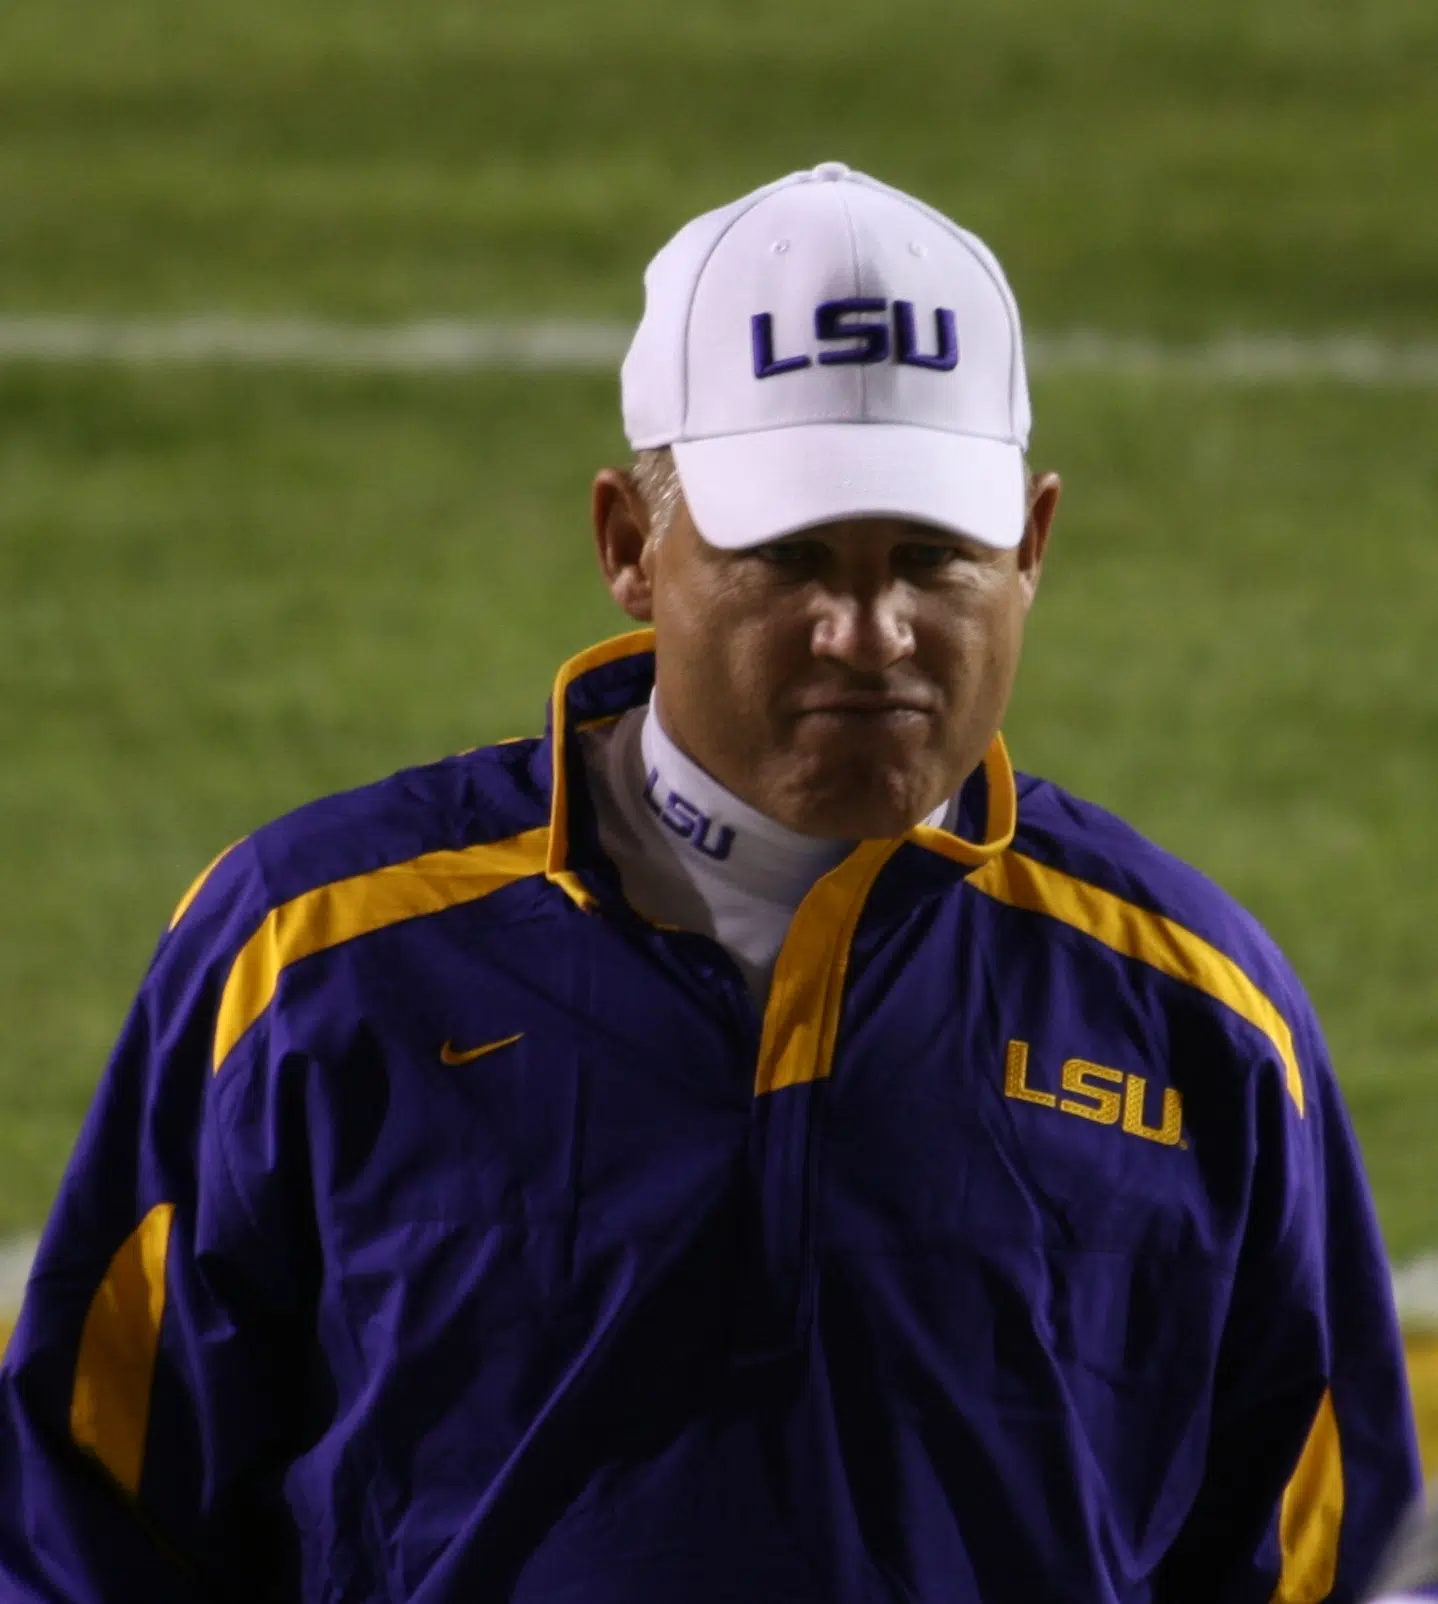 USA Today/Advocate report: Les Miles allegedly sexually harassed student workers